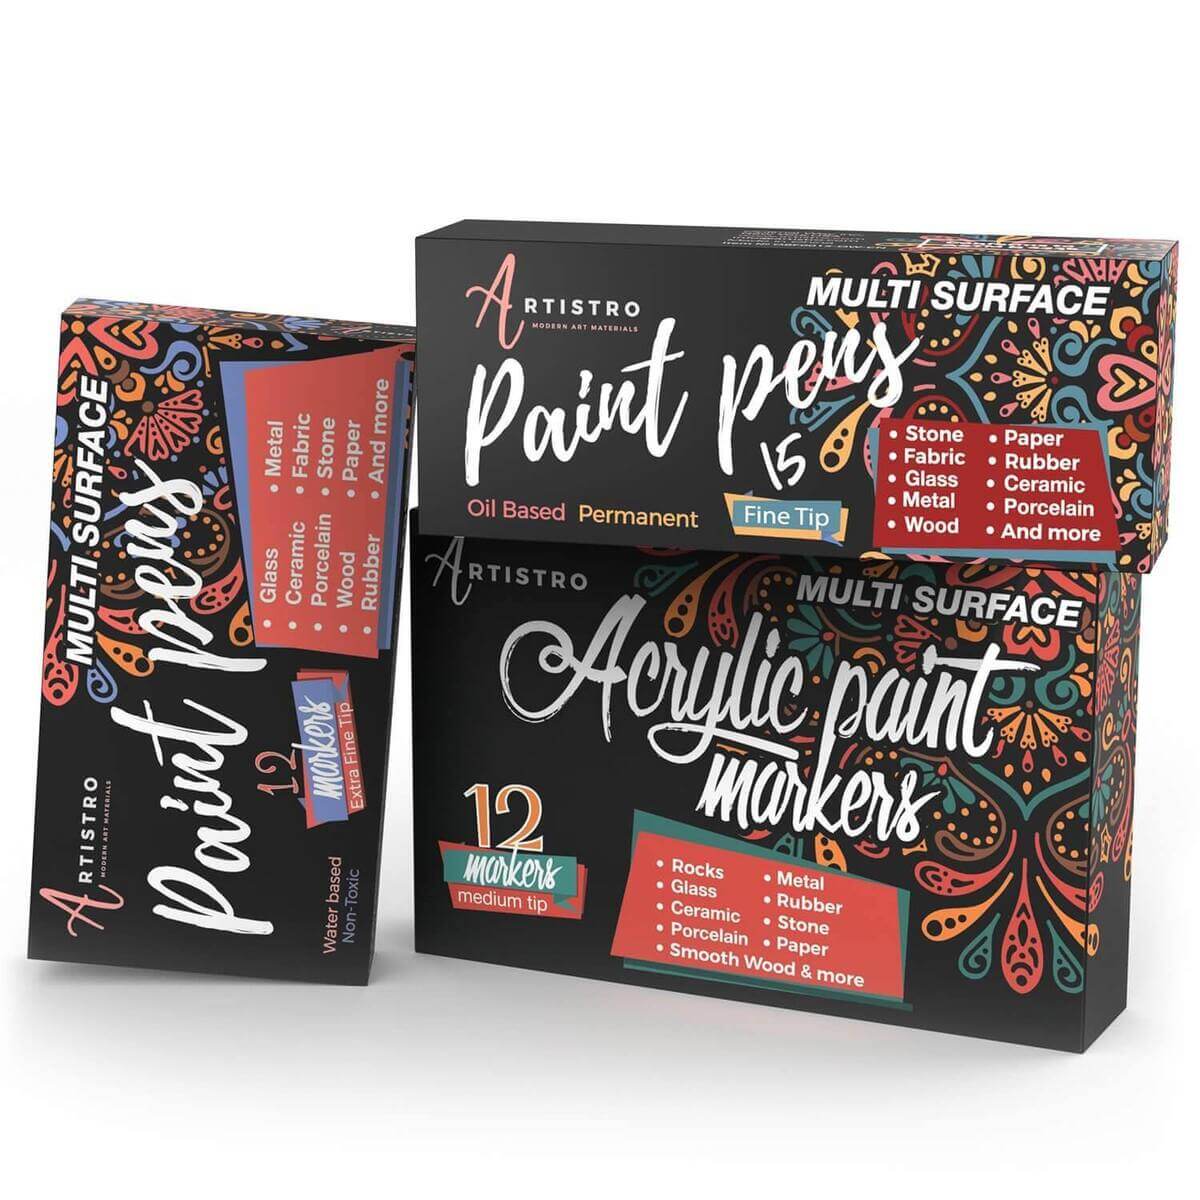 POSCA Water Based Permanent Marker Paint Pens. Street Art Gift Set Tin for  Arts and Crafts. Multi Surface Use On Wood, Metal, Paper, Cardboard, Glass,  Fabric, Ceramic & Stone. Set of 20